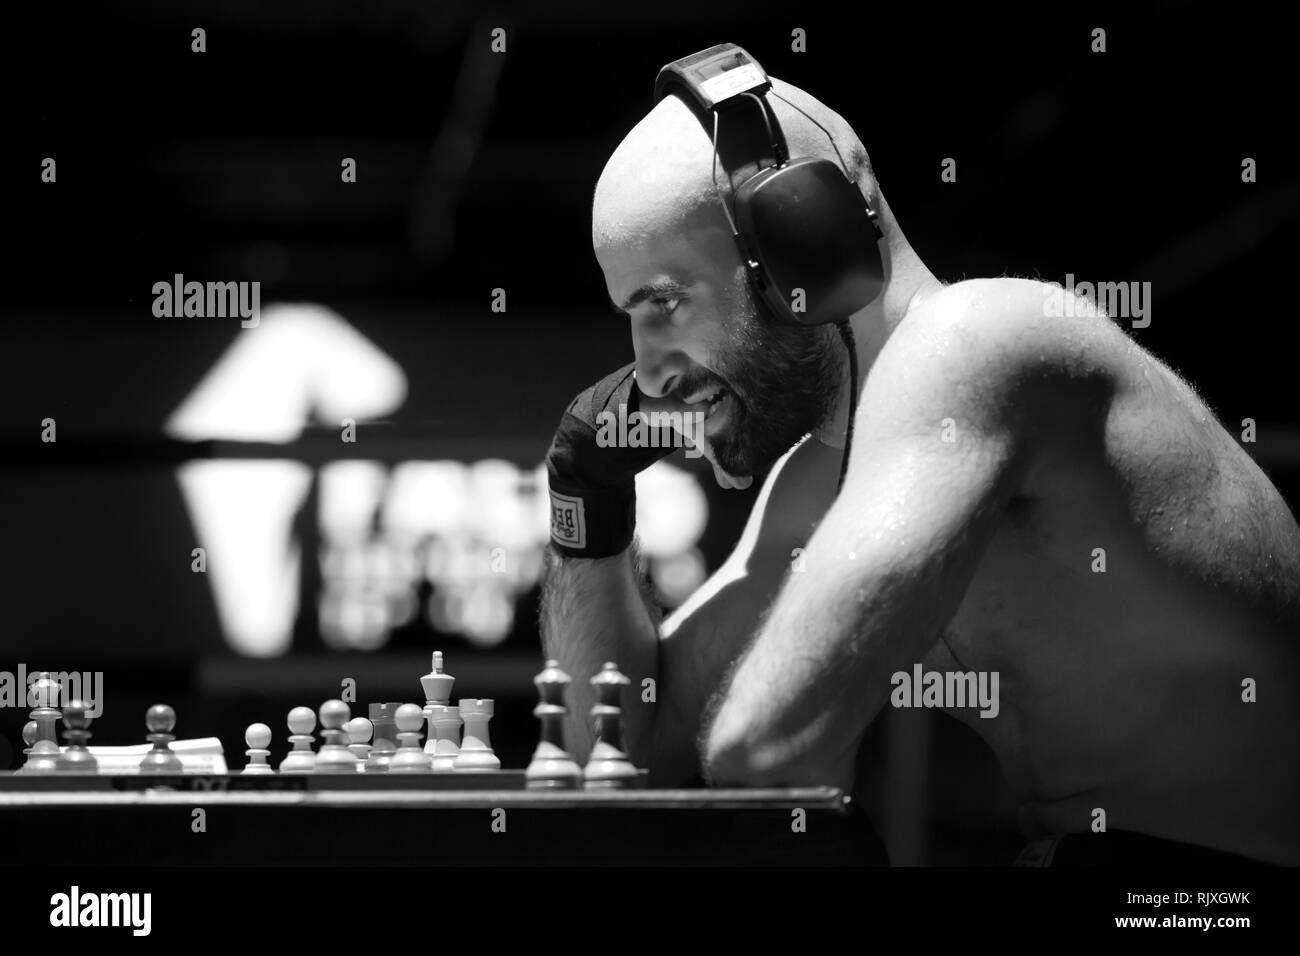 Inventor of Chessboxing – World Chess Boxing Organisation